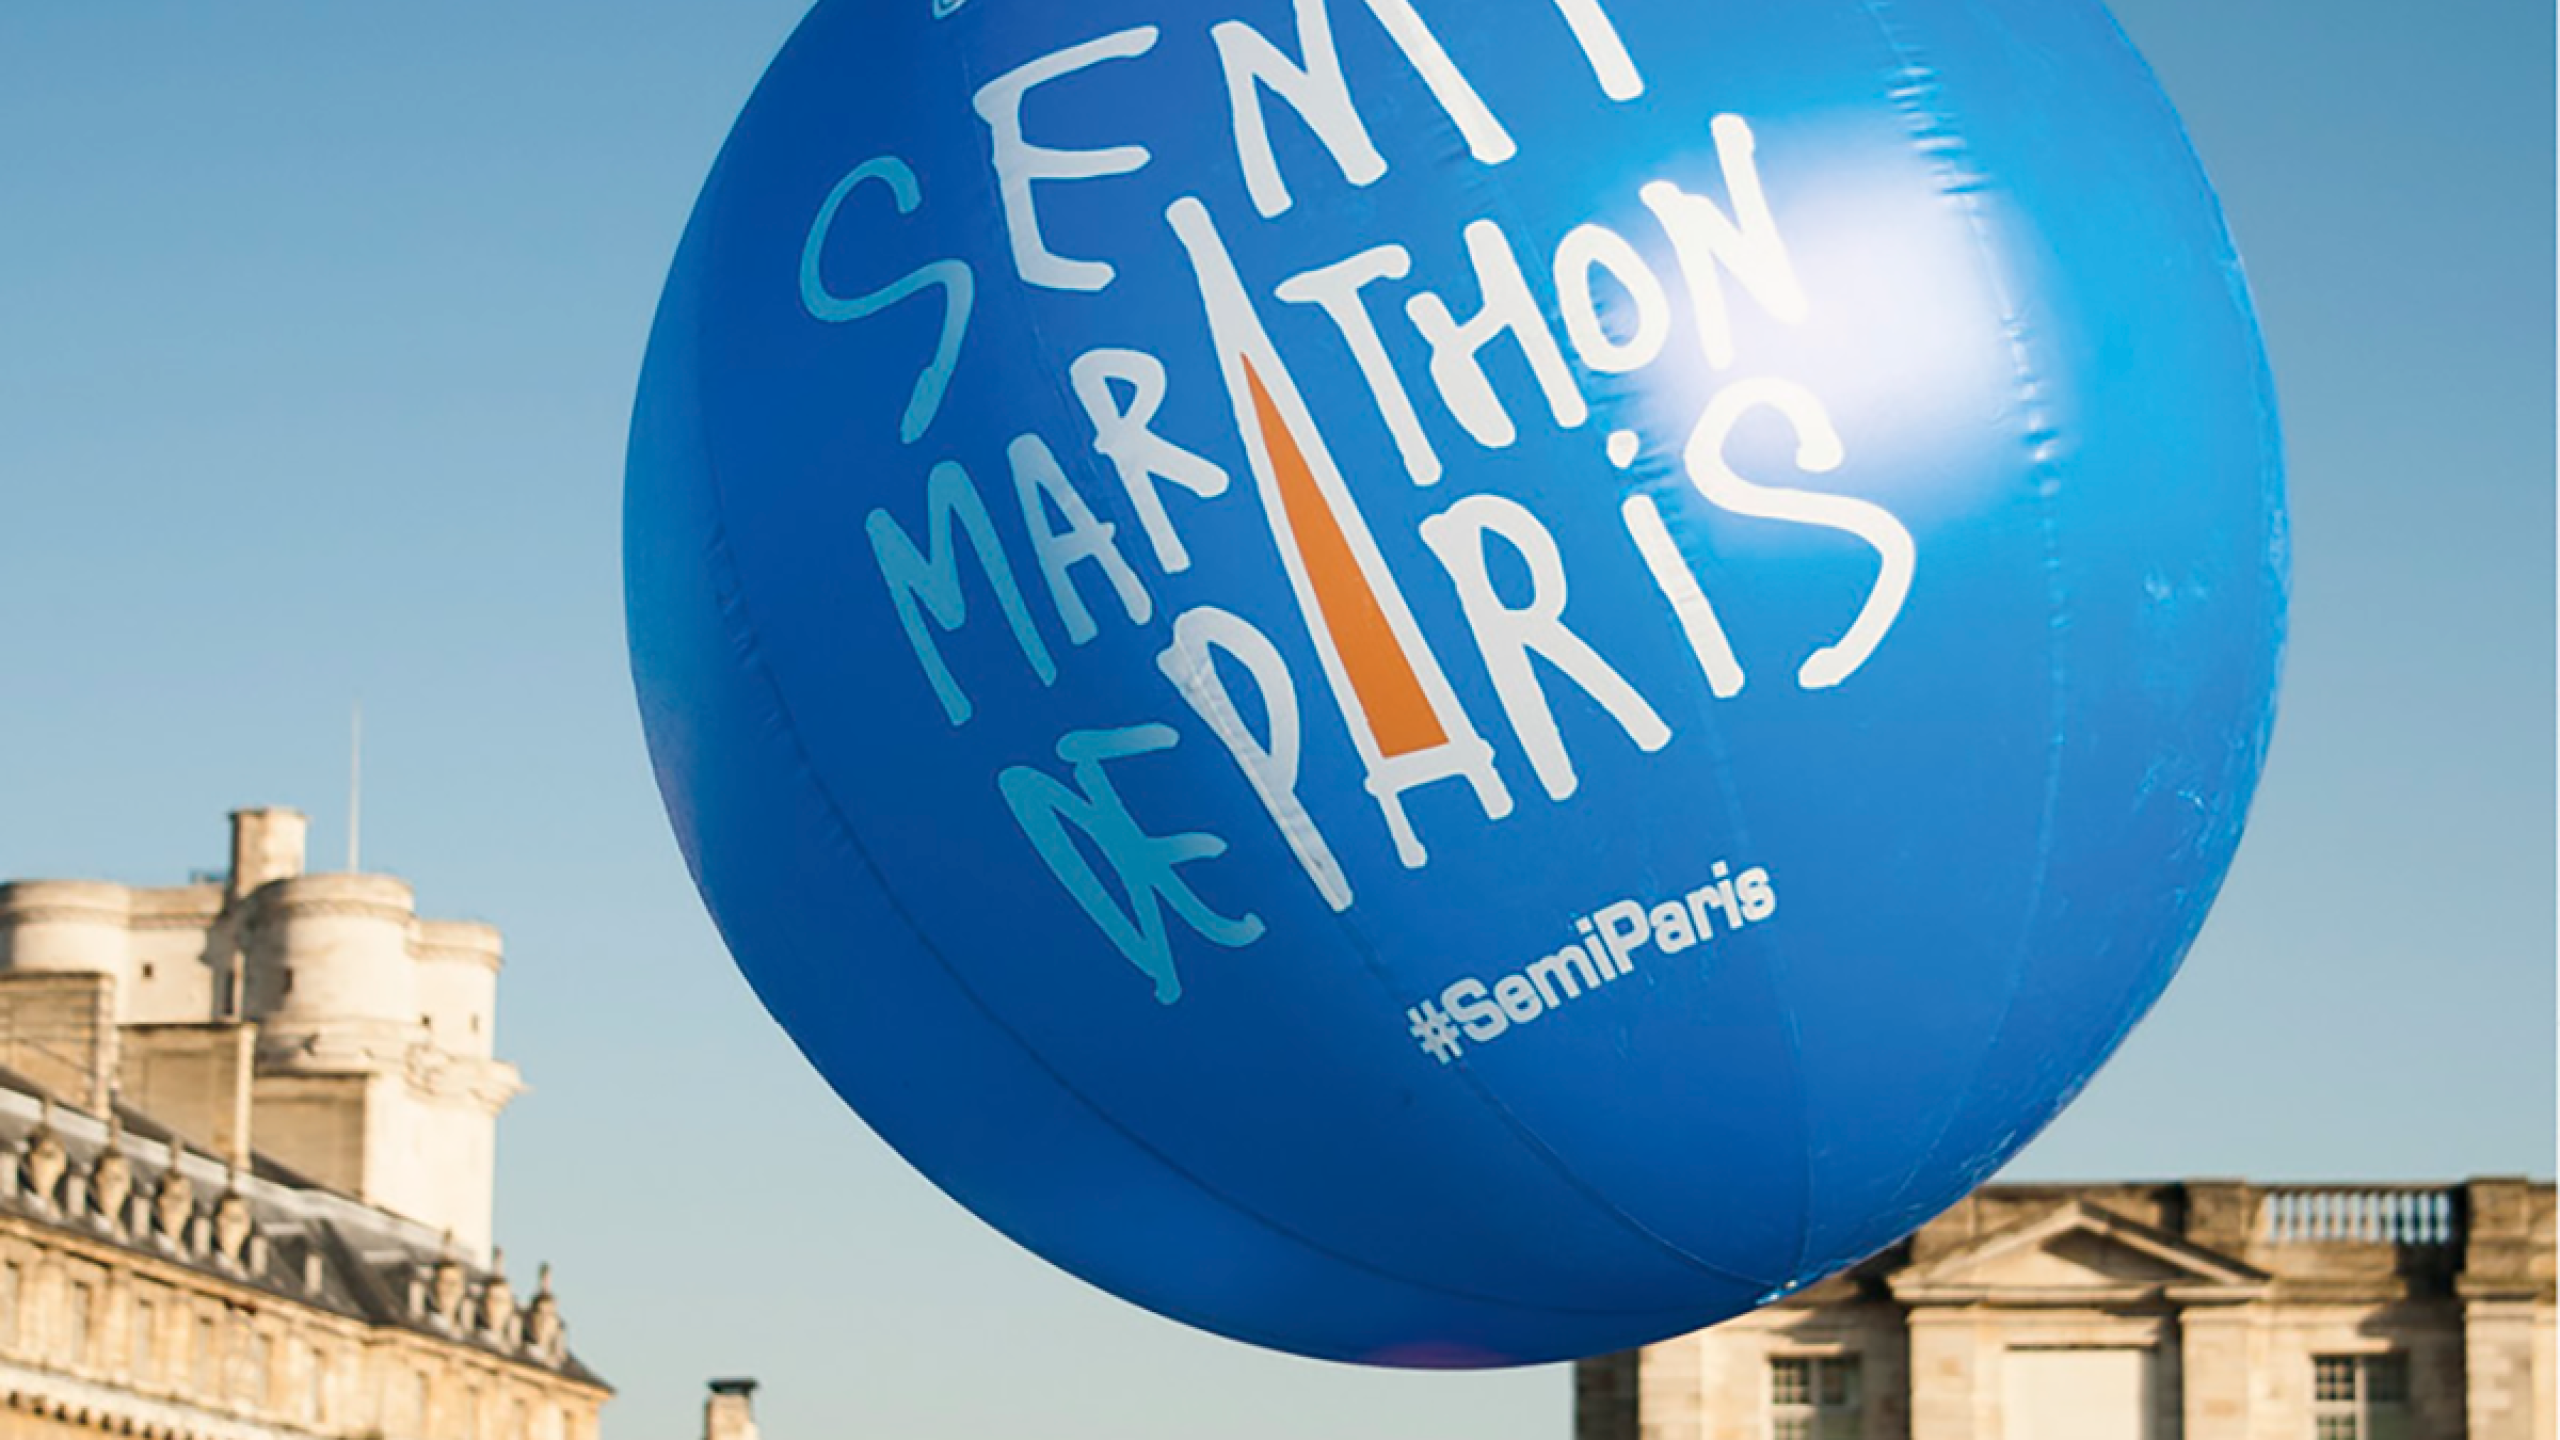 A view of runners assembling in a square with a big blue balloon which says 'Semi Marathon De Paris'